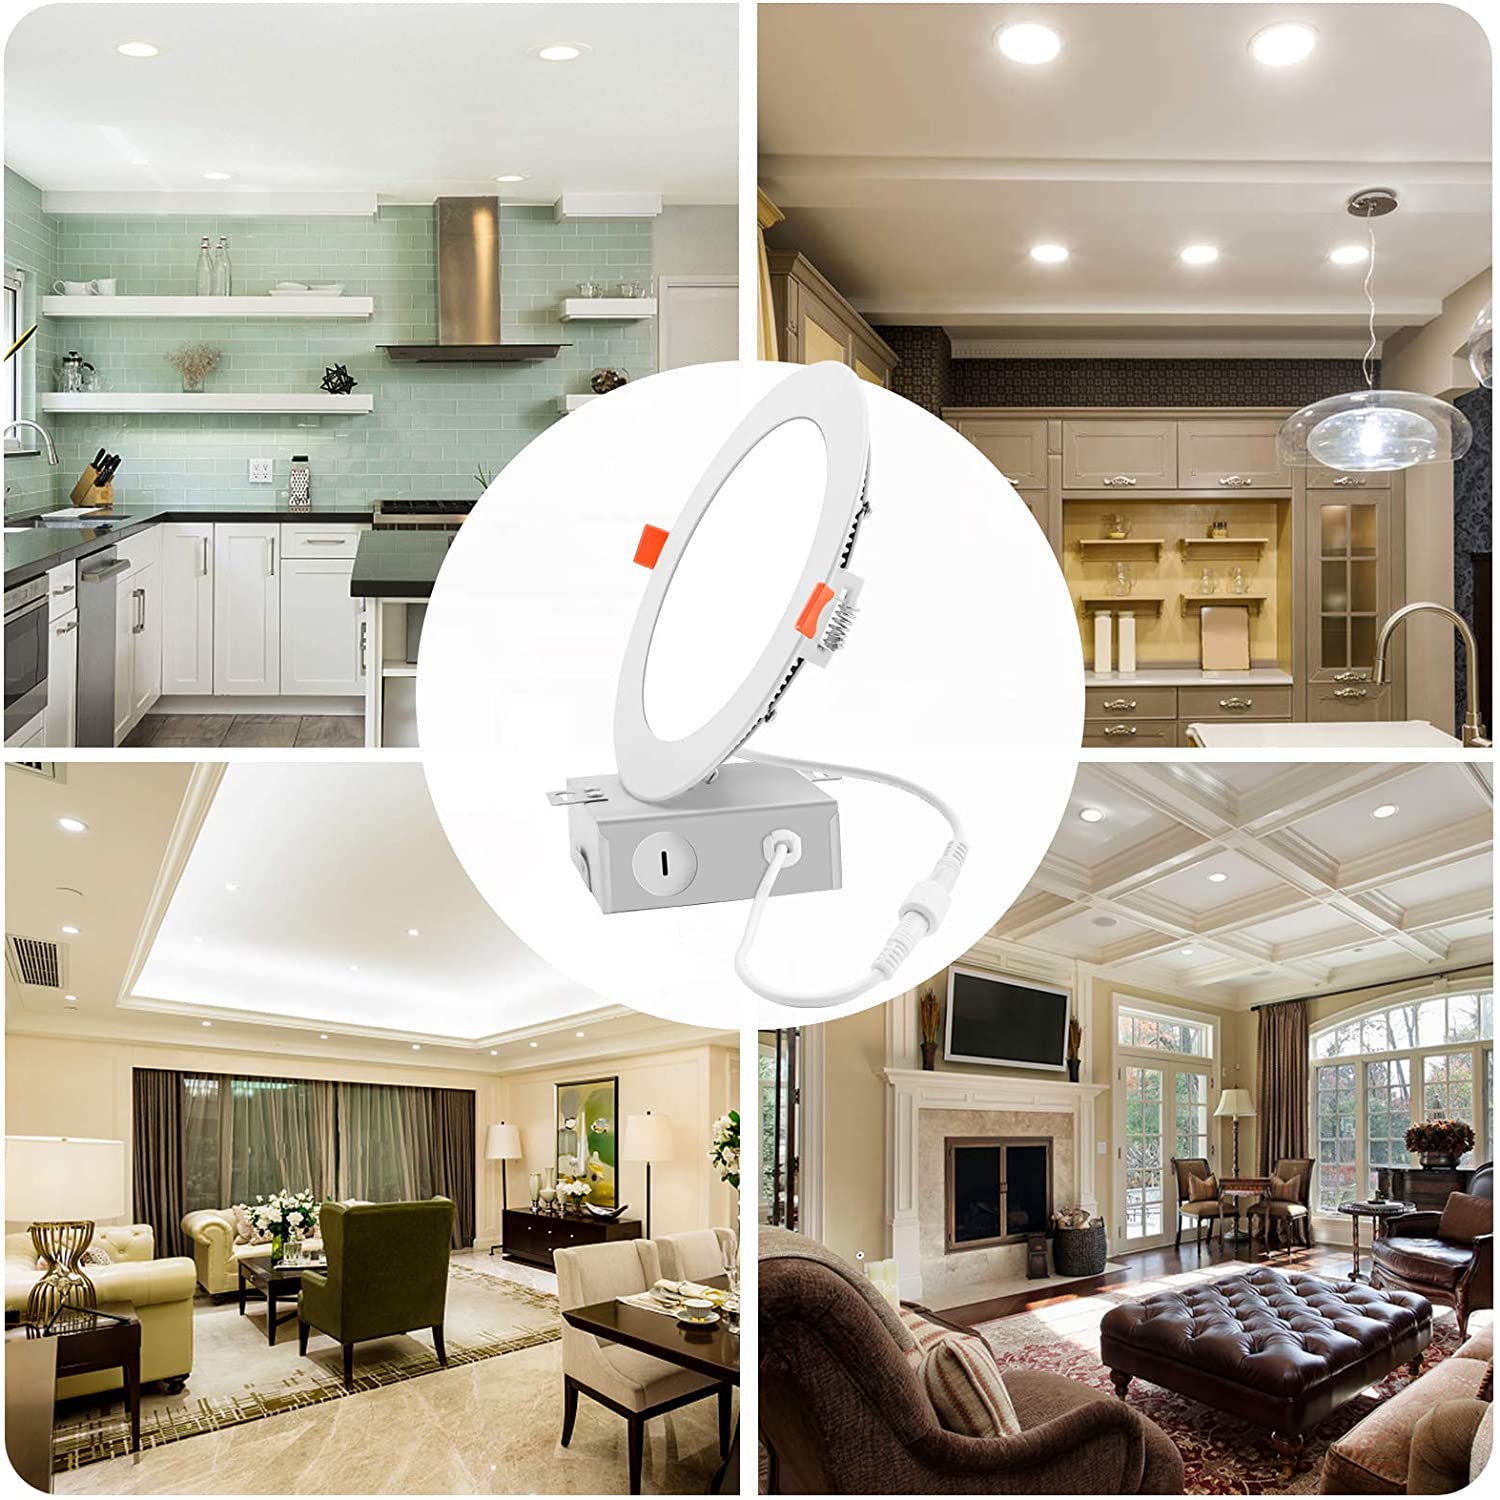 ENERGETIC Ultra-Thin inch LED Recessed Lighting, Dimmable, 12W=110W Eqv,  850 Lumens, 4000K Cool White Canless Downlight, ETL Certified, Pack,  Years Warranty